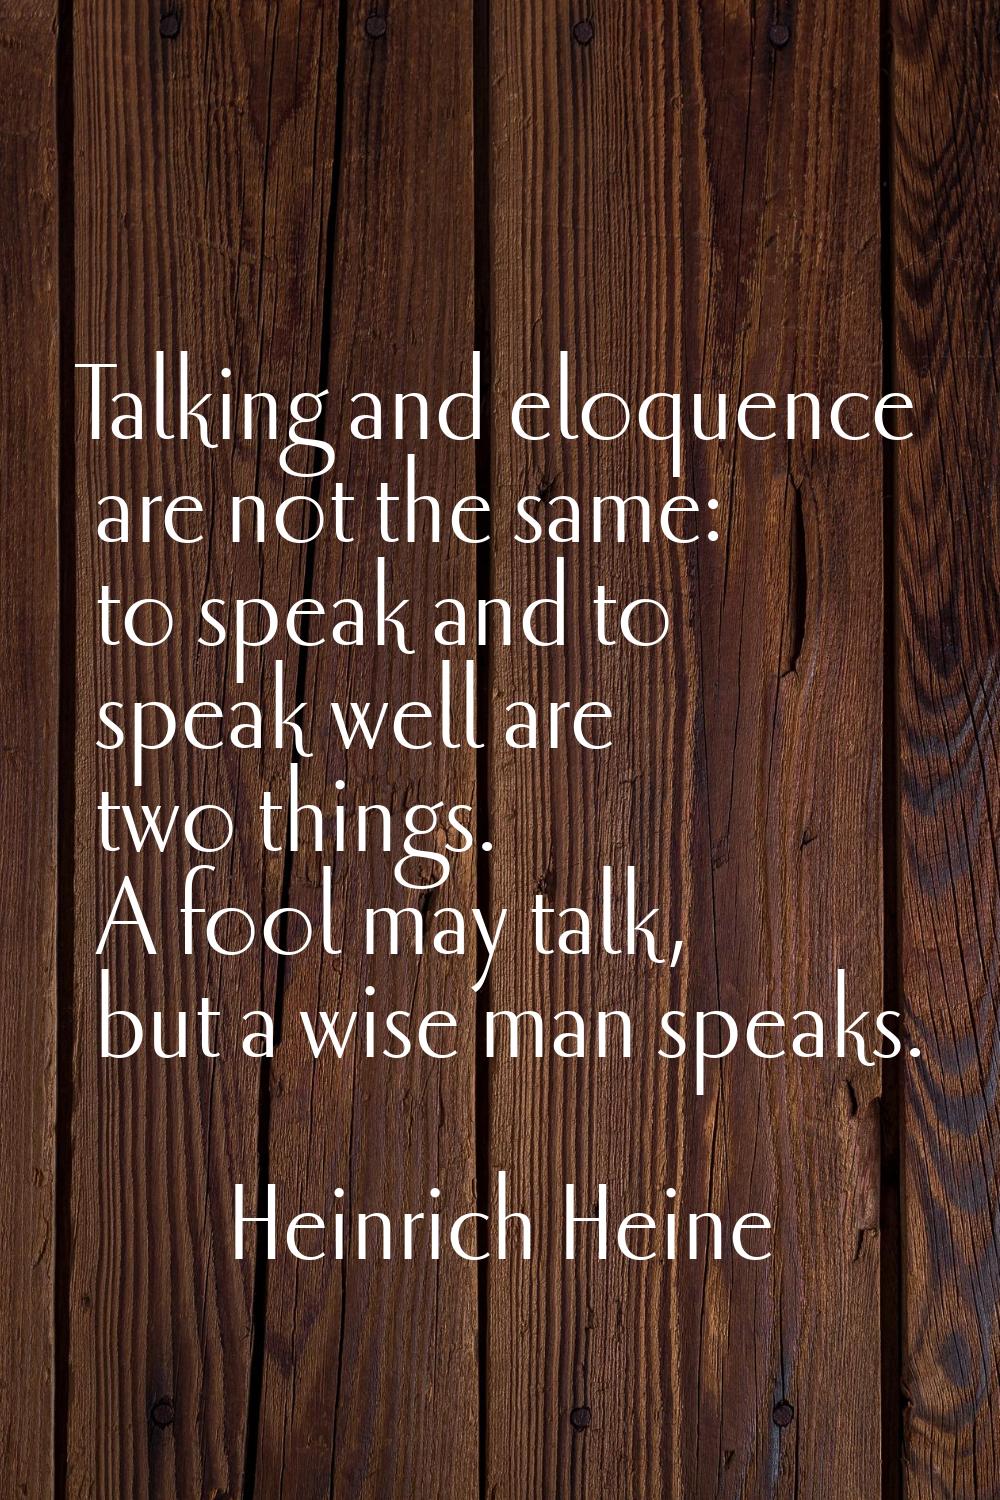 Talking and eloquence are not the same: to speak and to speak well are two things. A fool may talk,